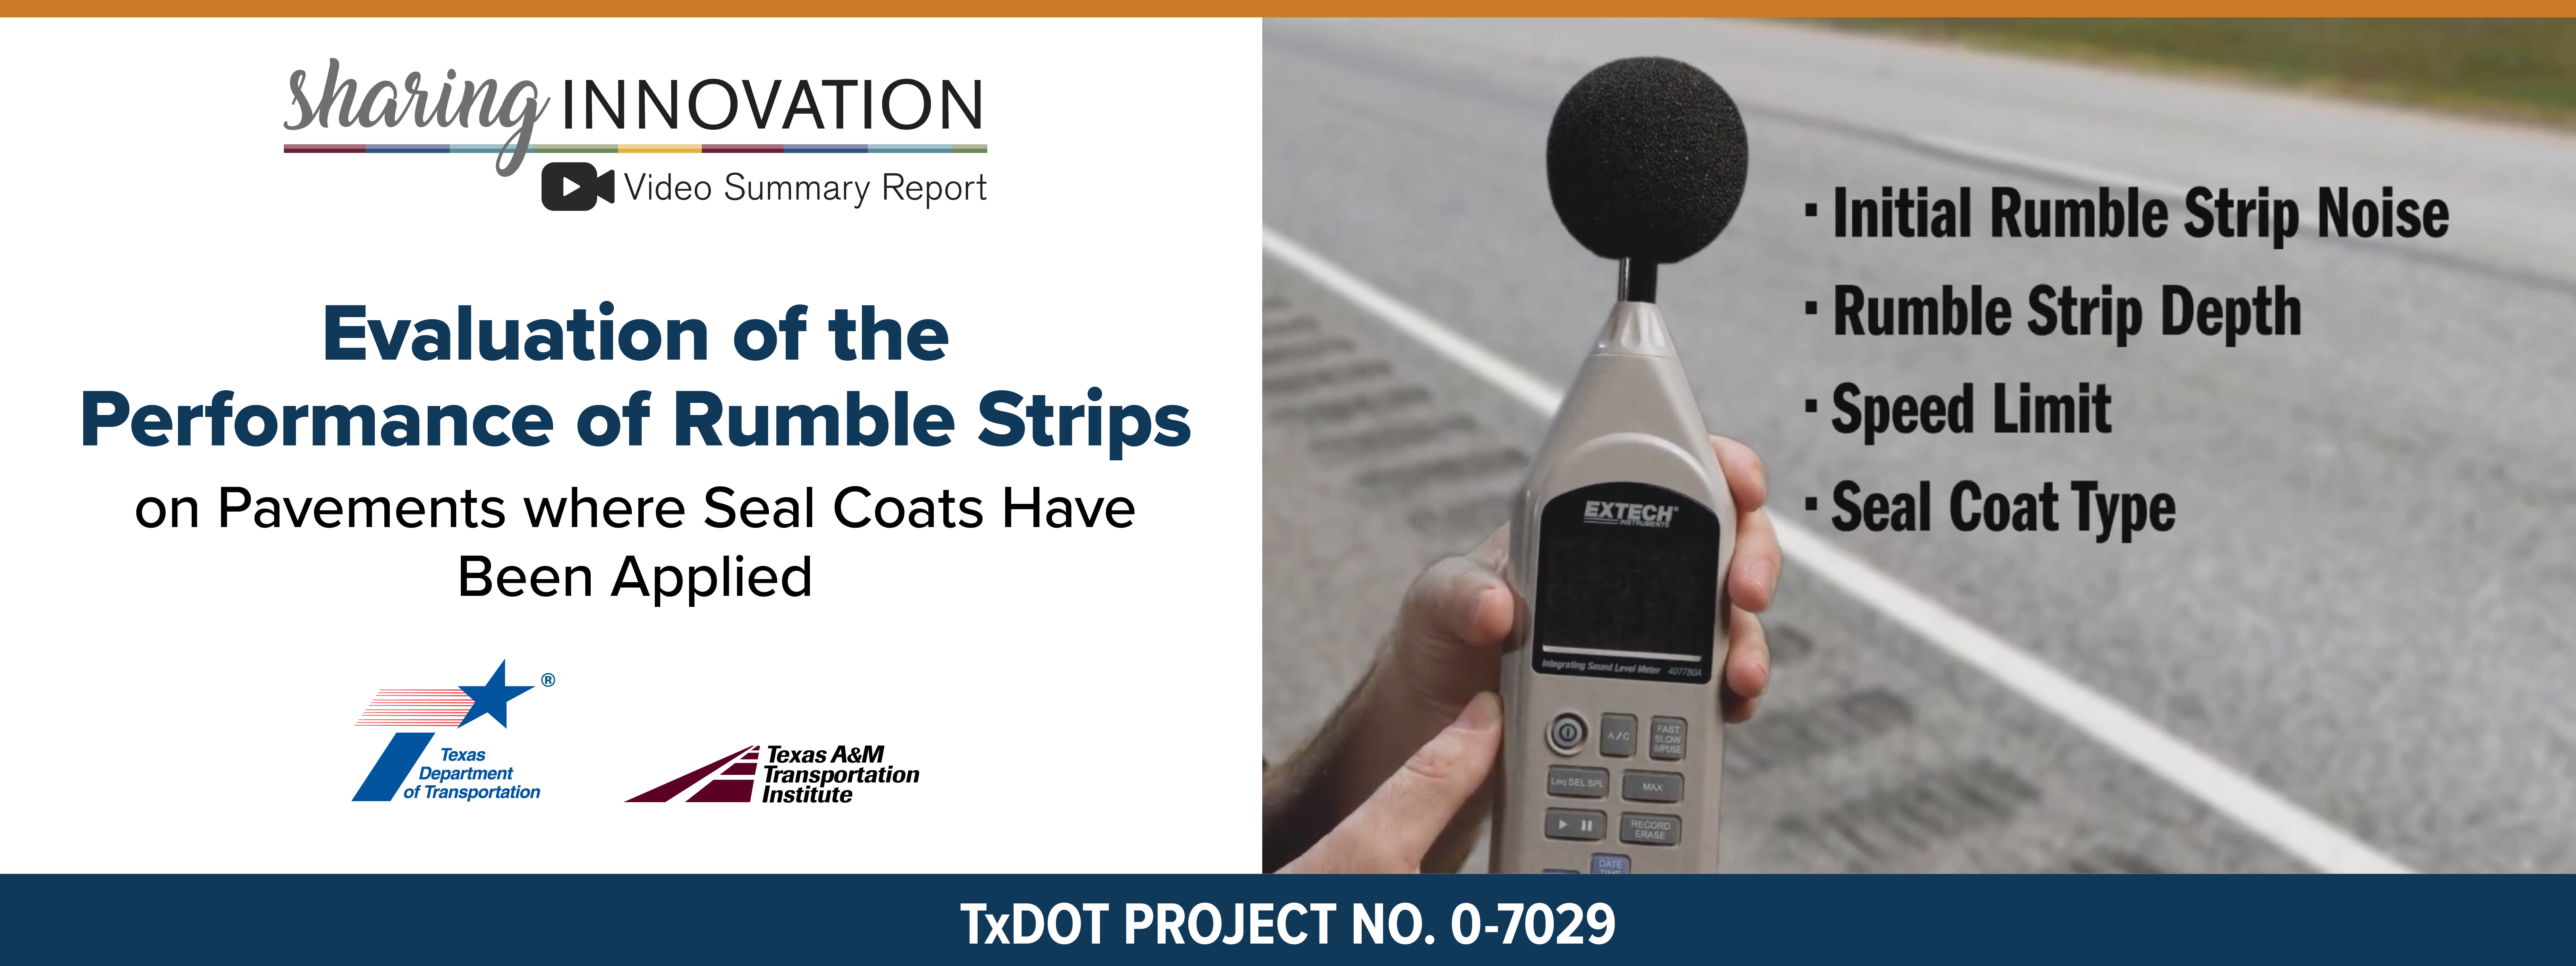 Sharing Innovation Video Summary Report: Evaluation of the Performance of Rumble Strips on Pavements where Seal Coats Have Been Applied